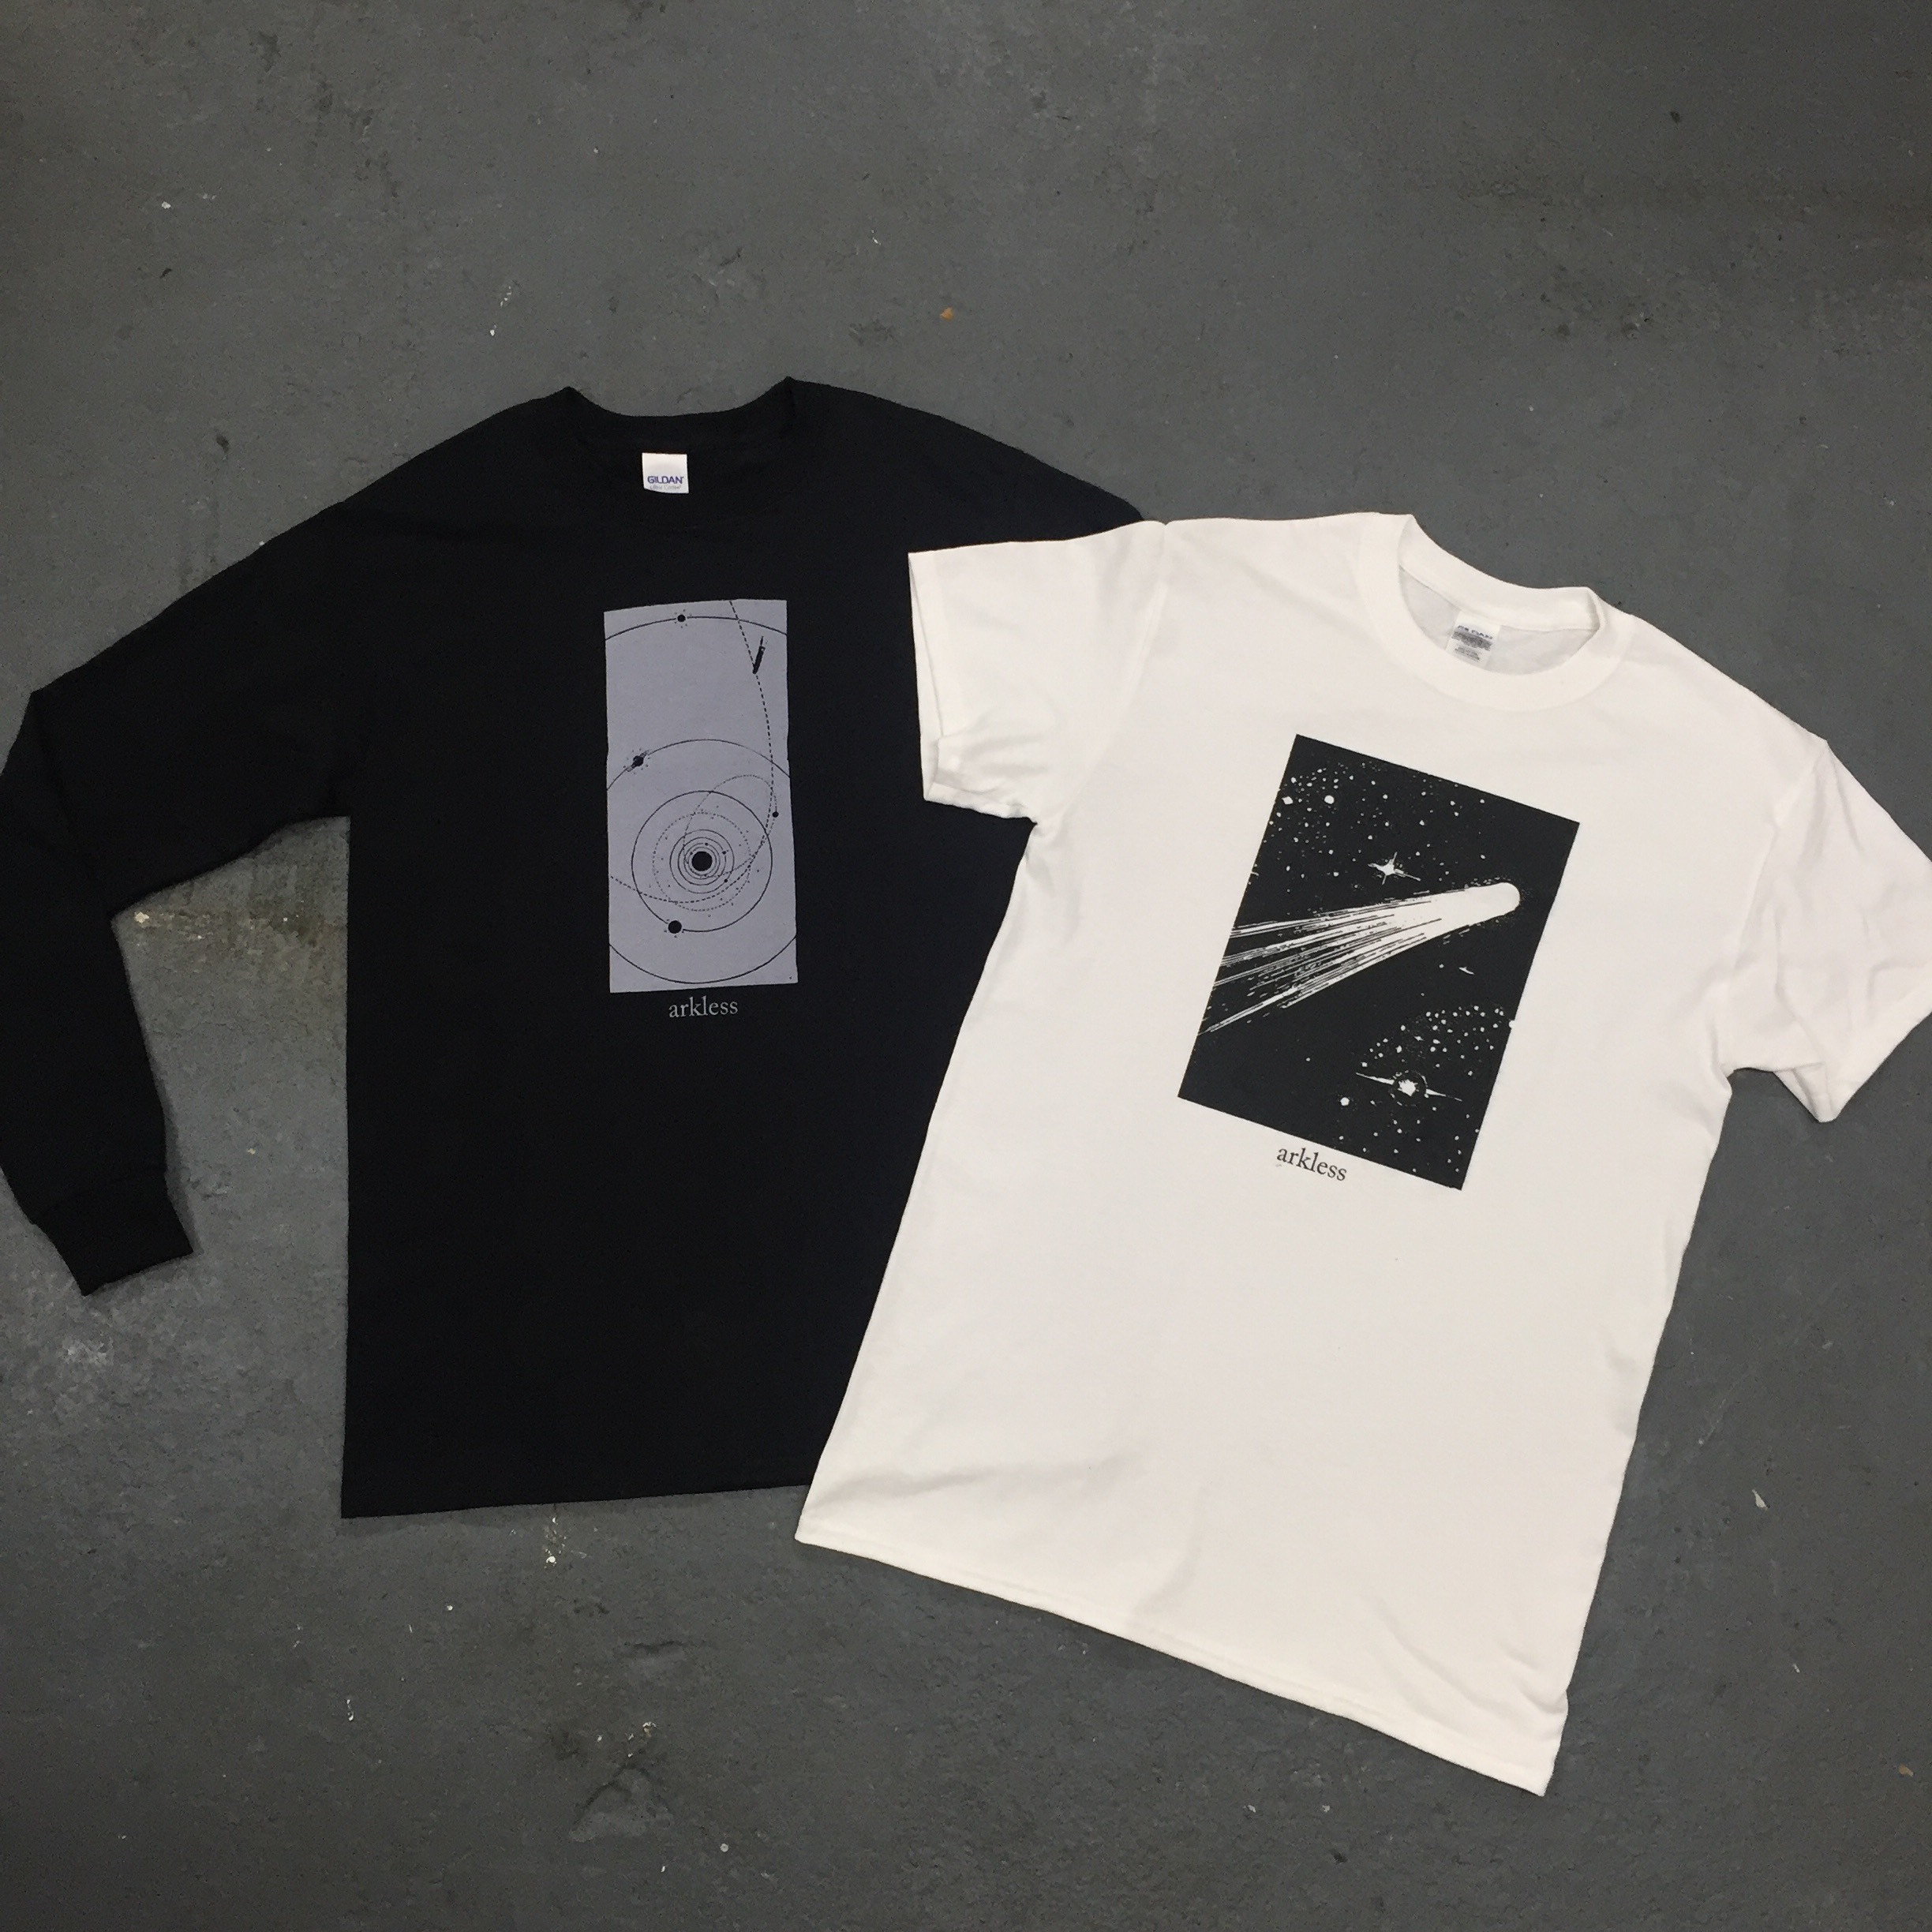 Arkless tshirts and long sleeves